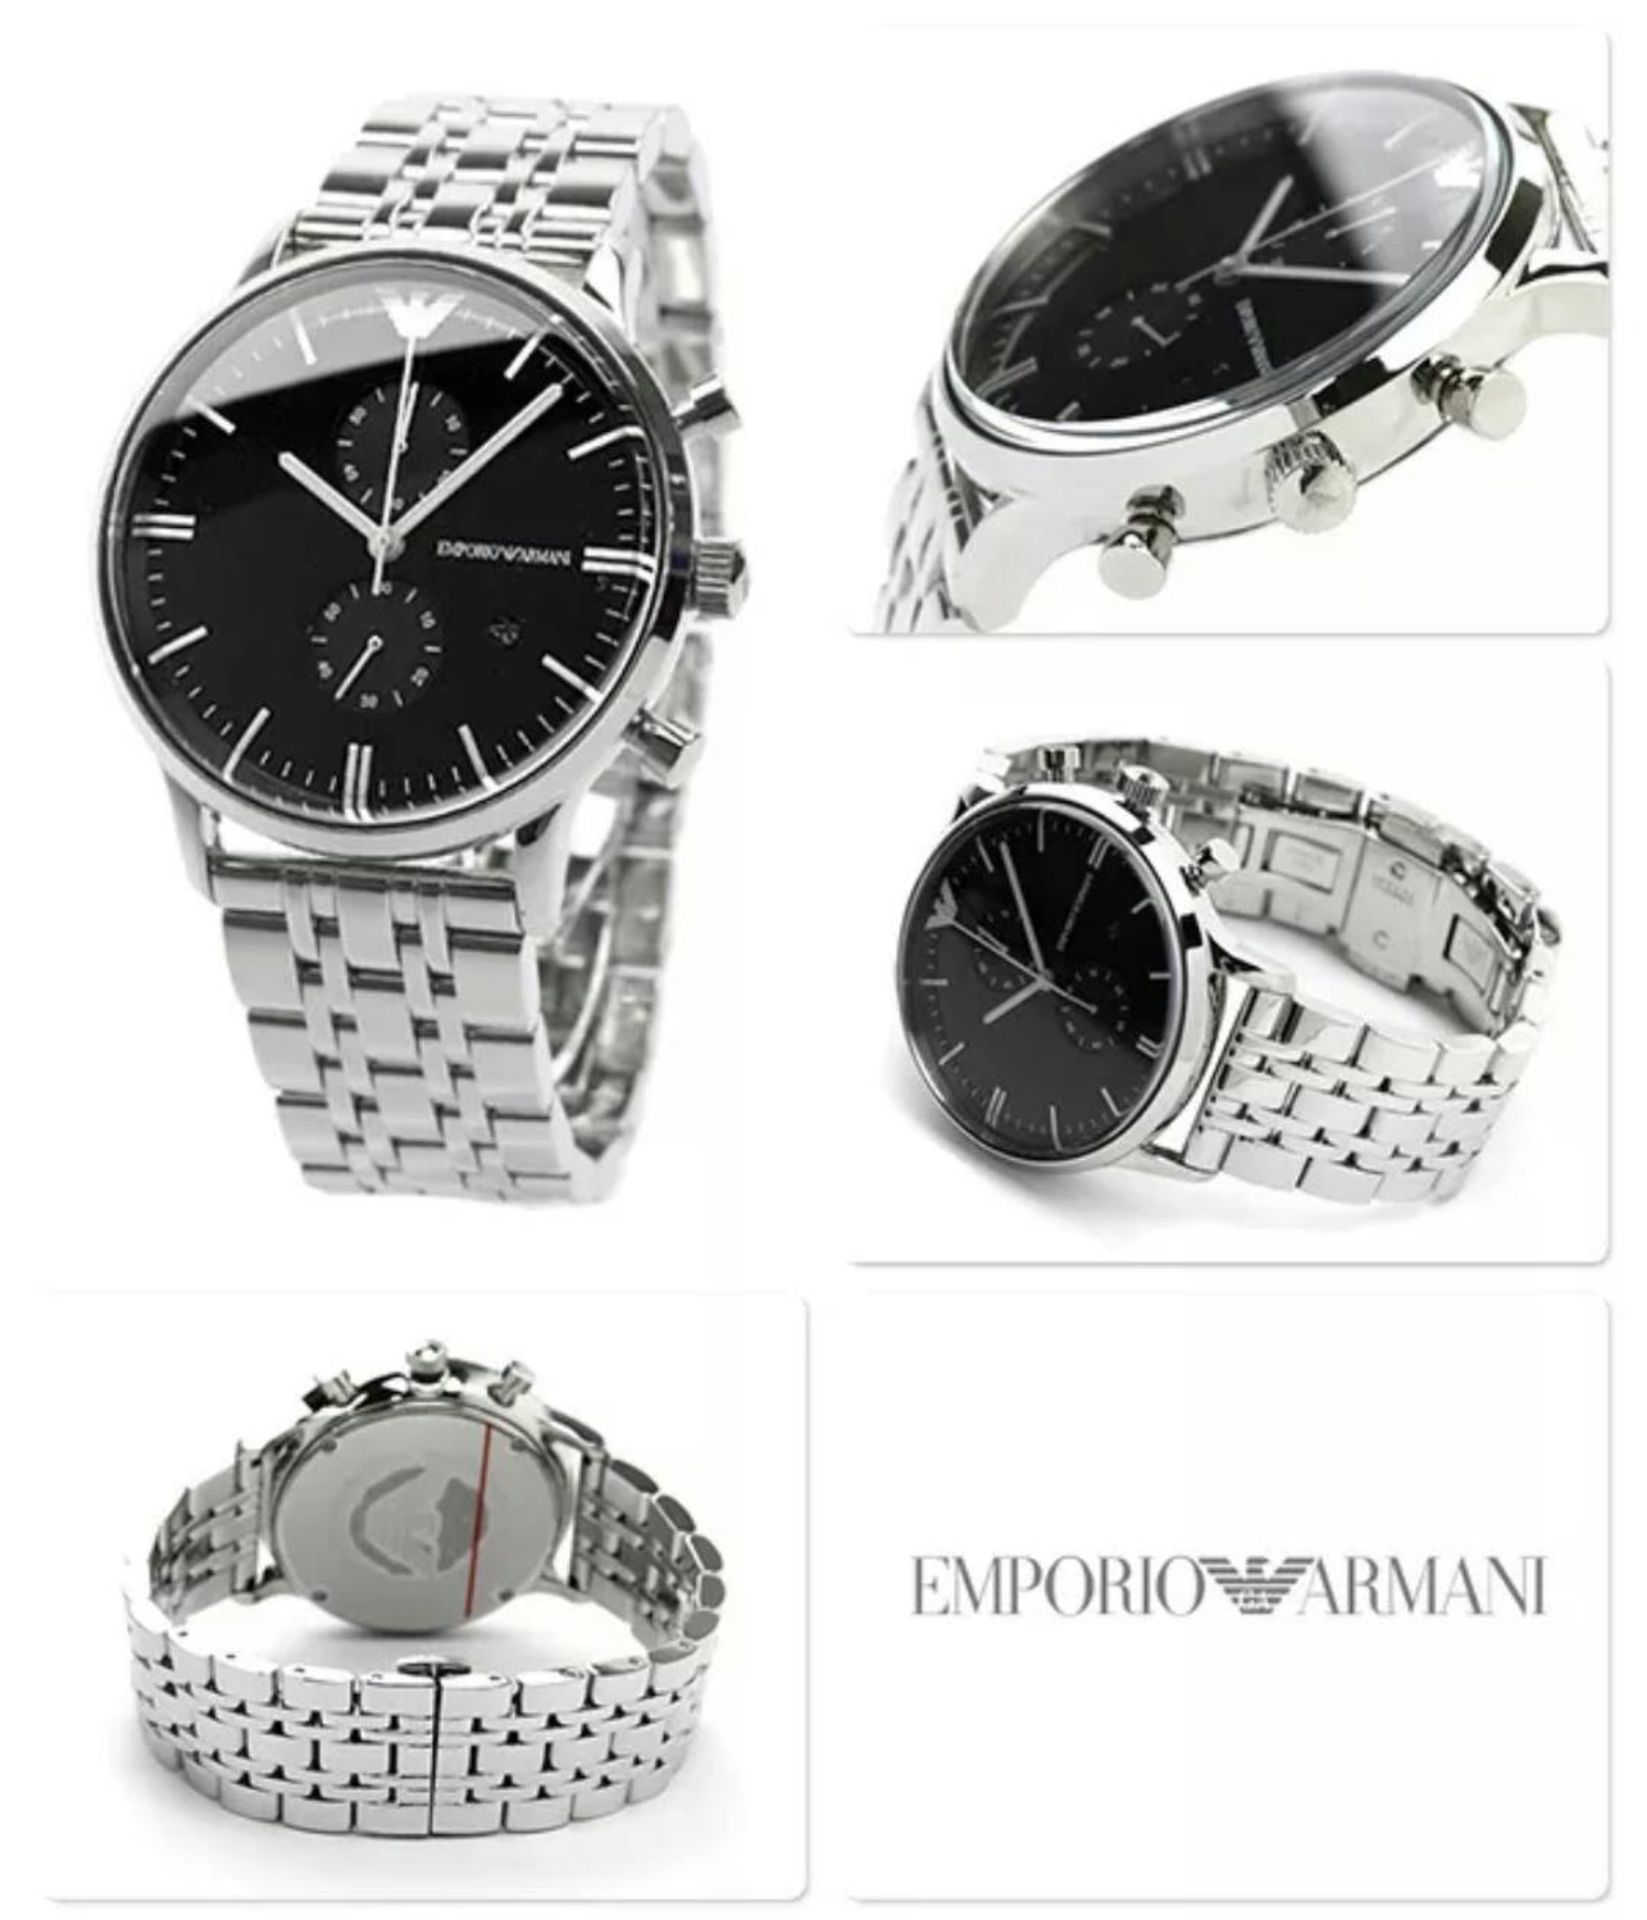 BRAND NEW GENTS EMPORIO ARMANI WATCH, AR0389, COMPLETE WITH ORIGINAL BOX, MANUAL AND CERTIFICATE - - Image 2 of 2